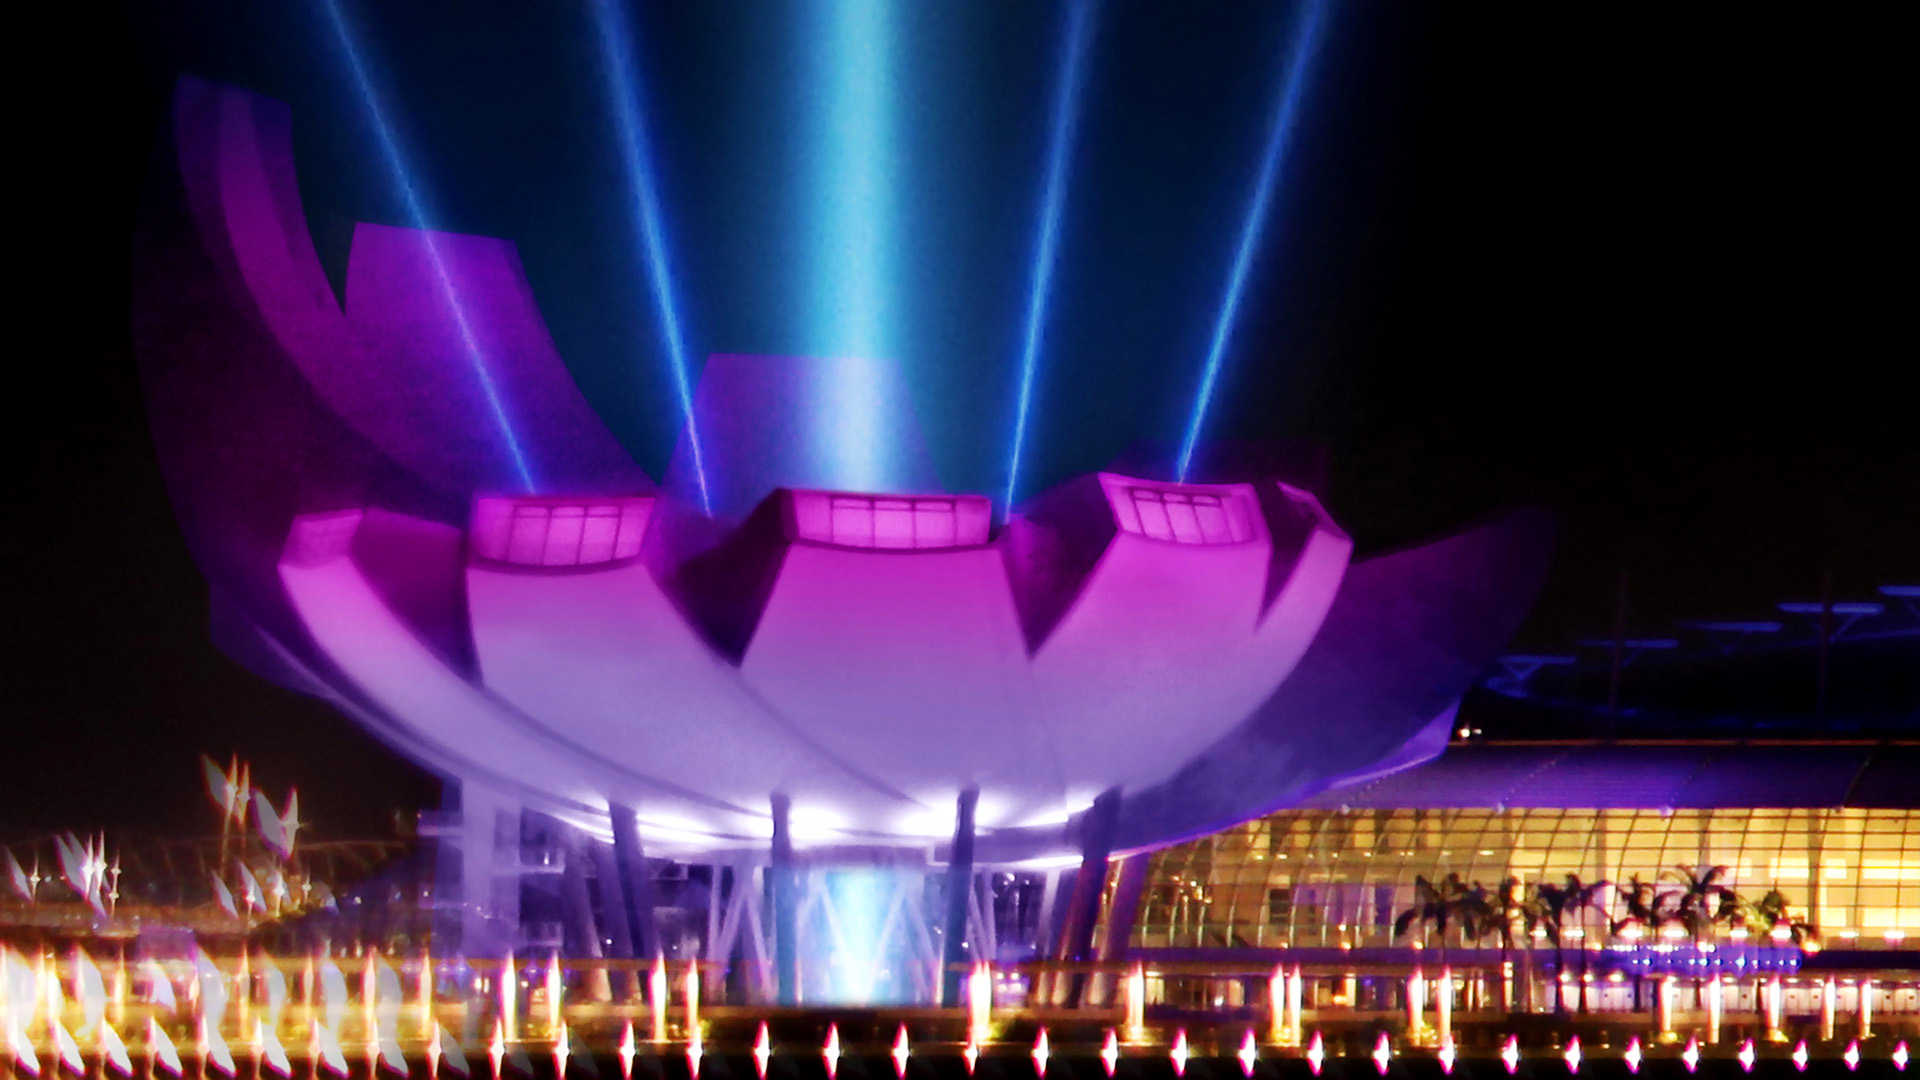 MarinaBaySands,Lasers,ArchitecturalLighting,MultimediaTouristAttraction Laservision